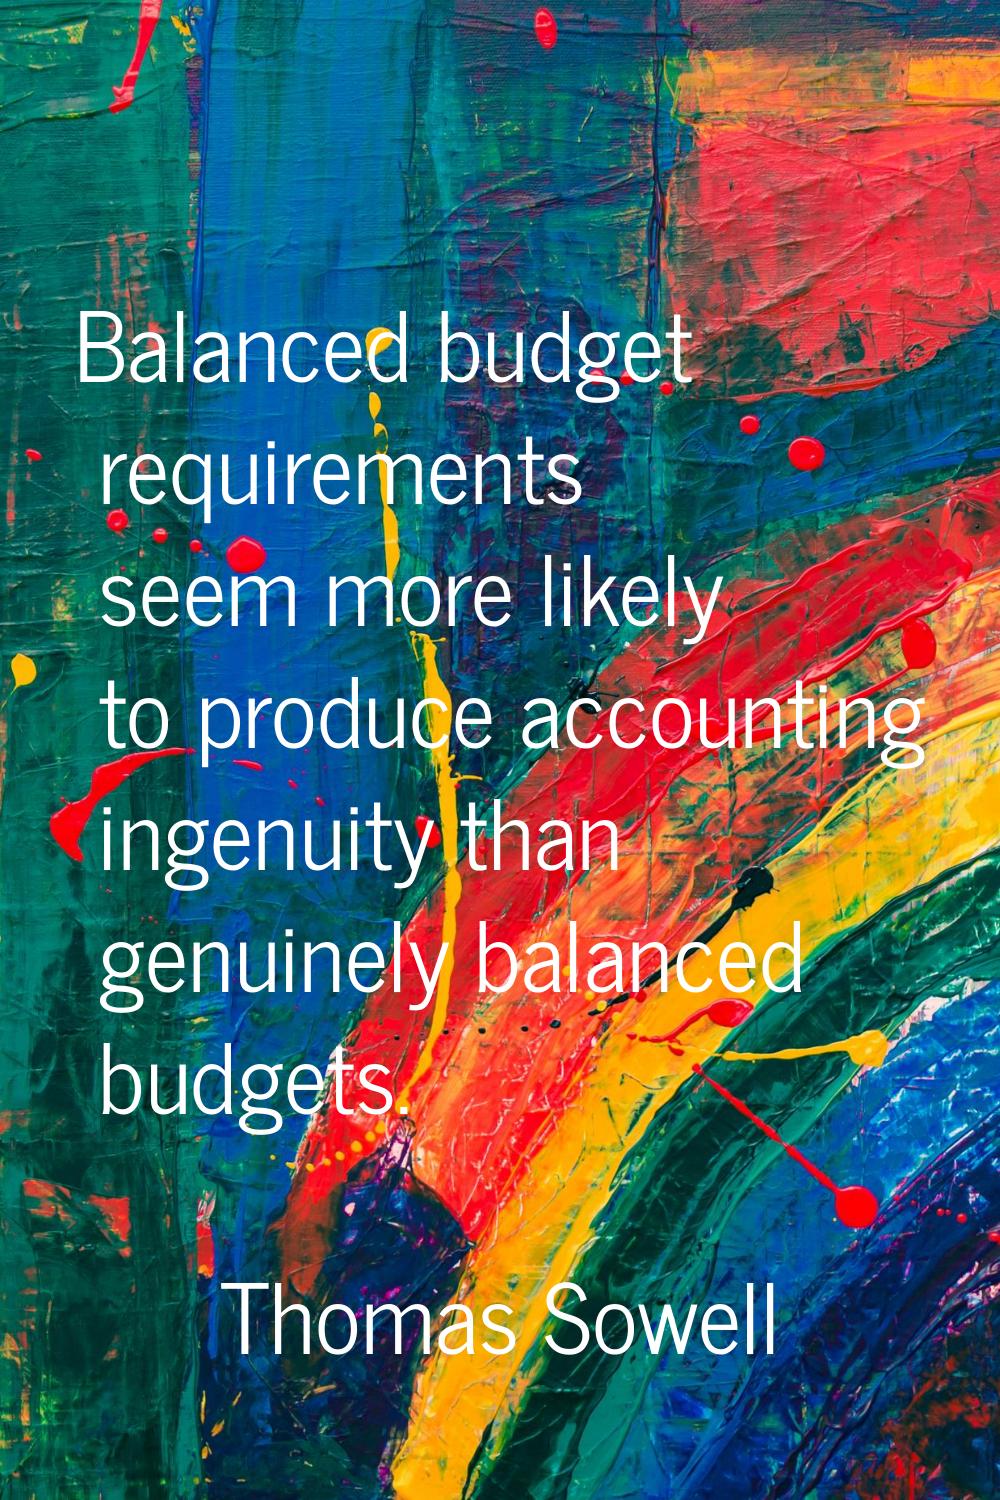 Balanced budget requirements seem more likely to produce accounting ingenuity than genuinely balanc